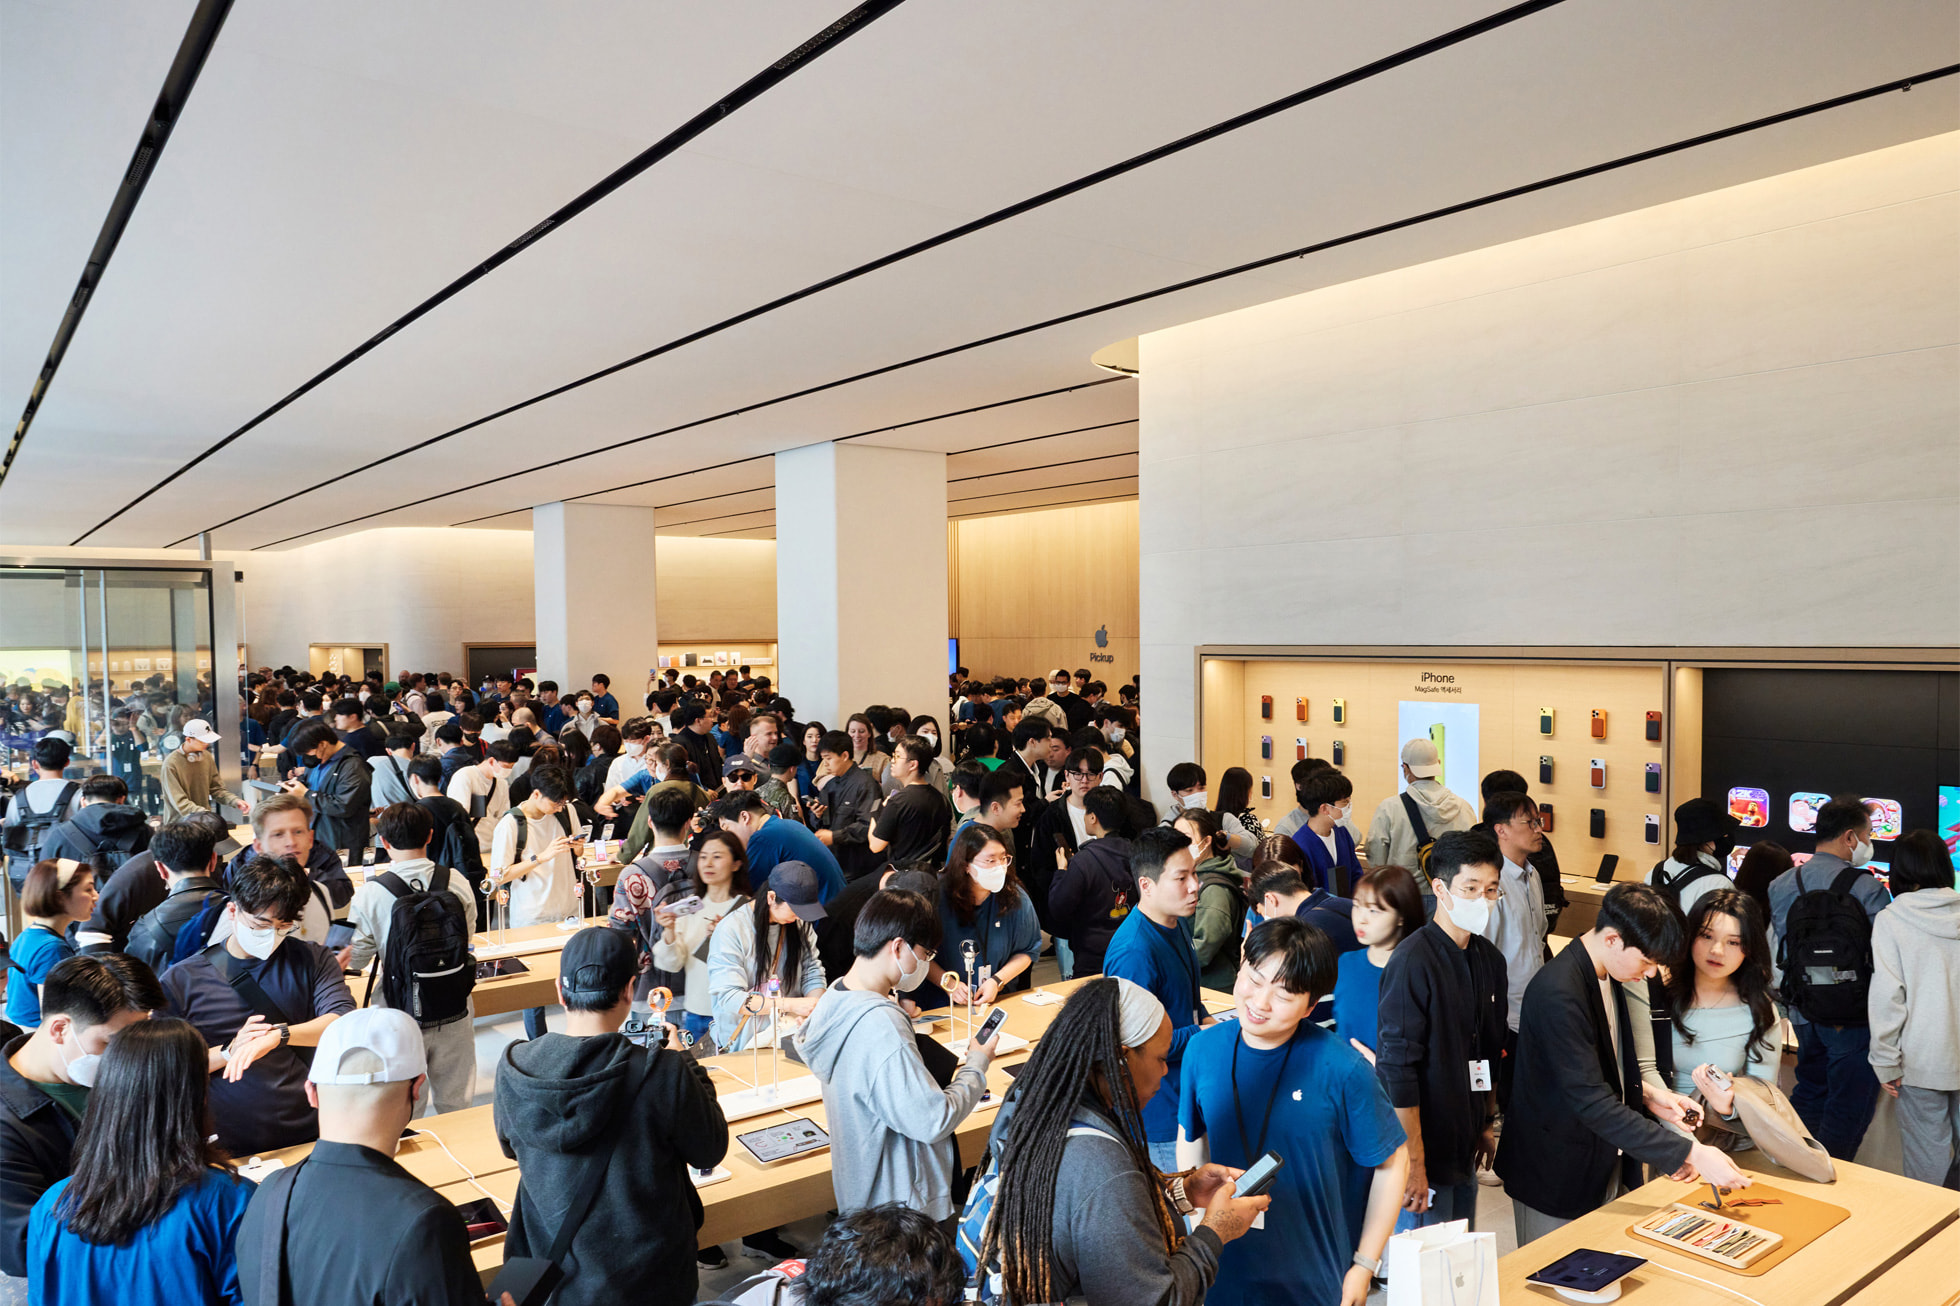 Apple's first store in South Korea opens Saturday - Apple